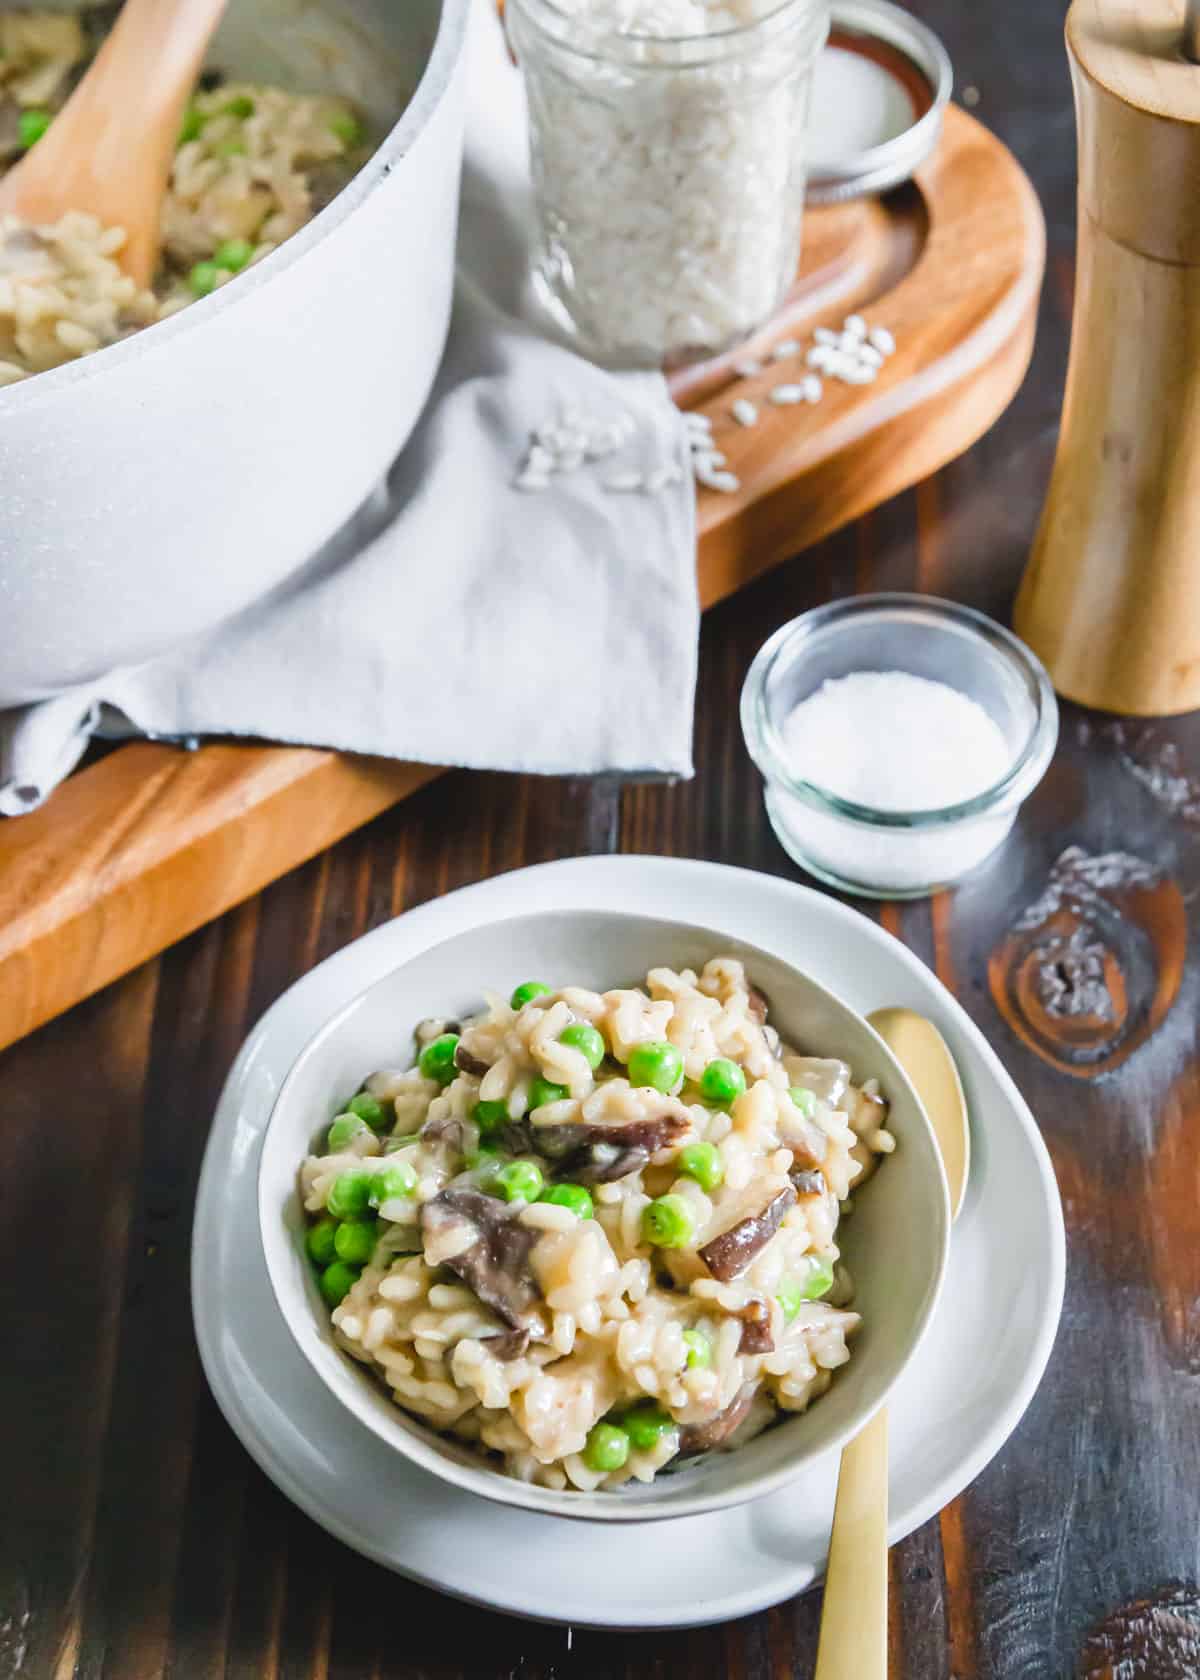 A simple, one-pot recipe for dairy-free, creamy vegan mushroom risotto with frozen peas